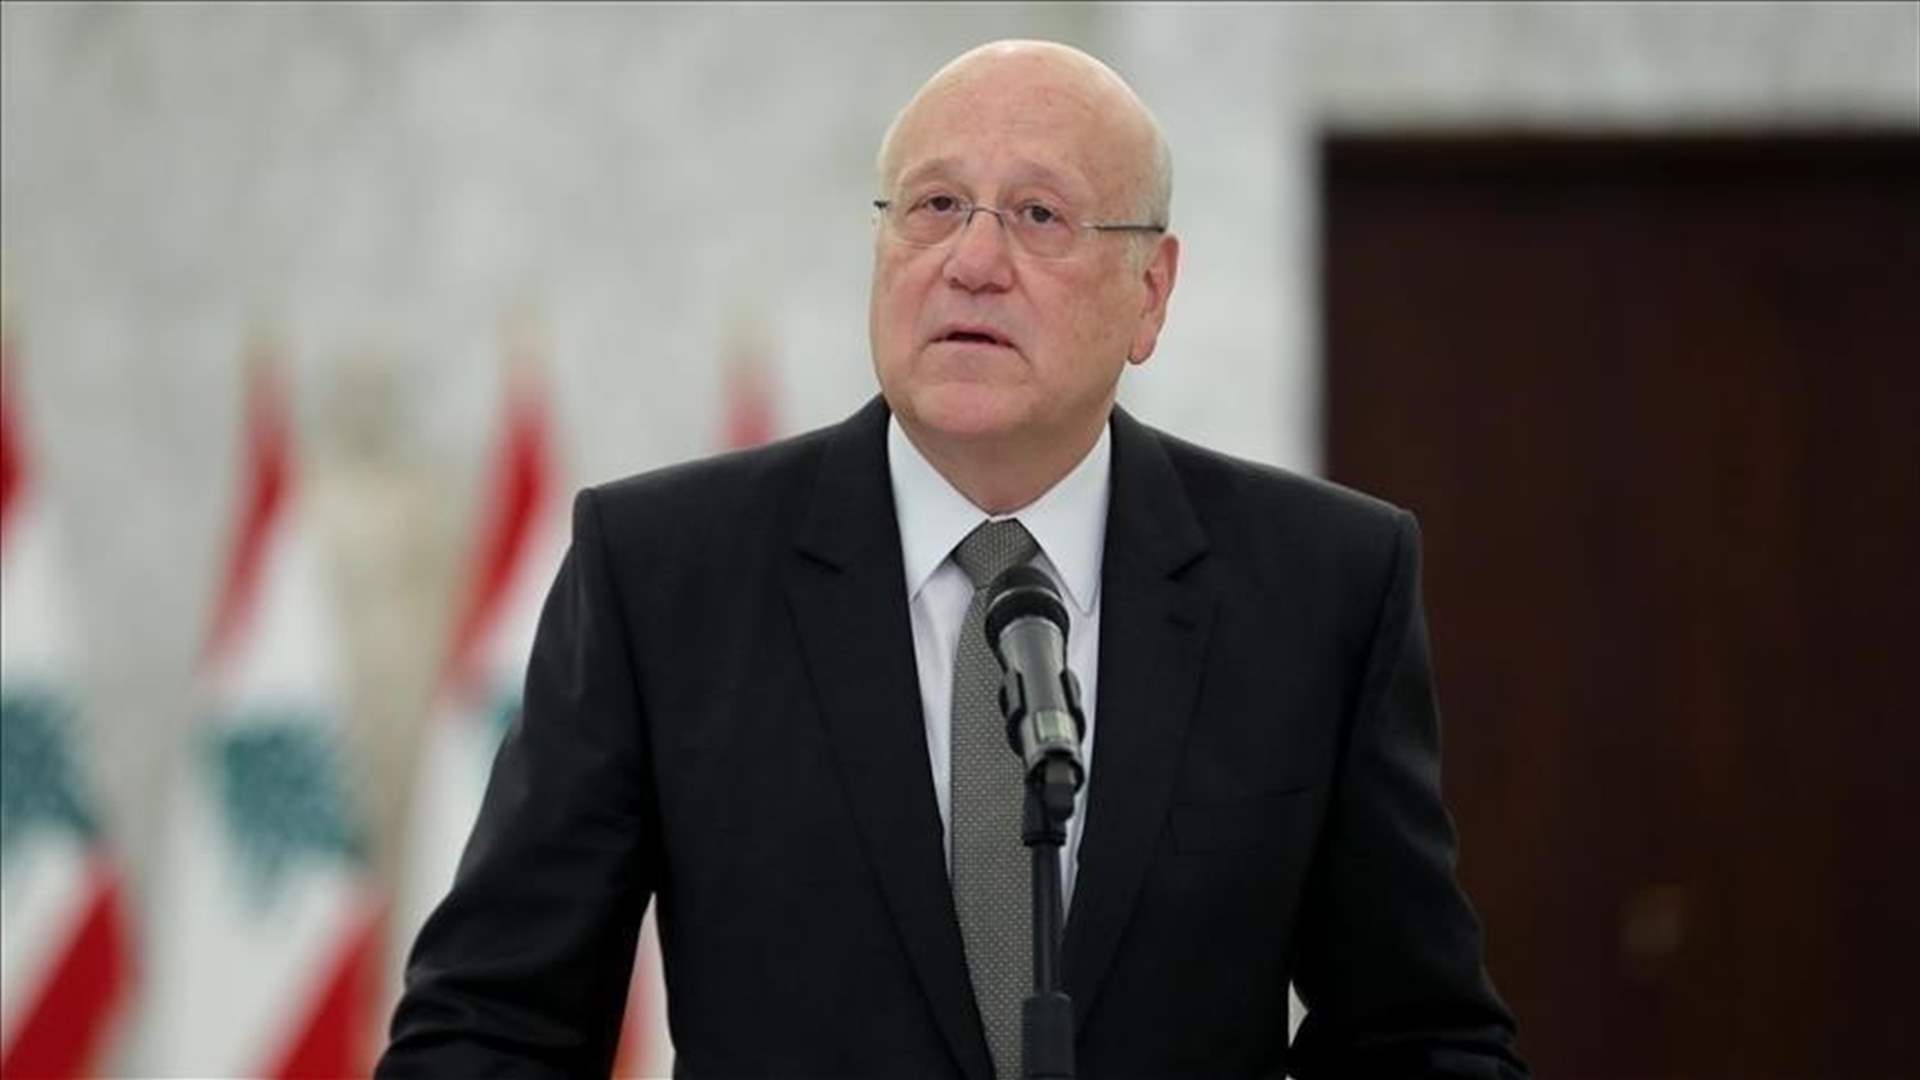 Mikati meets with Caretaker Interior Minister and LAF Commander, discusses security, Budget, and community initiatives